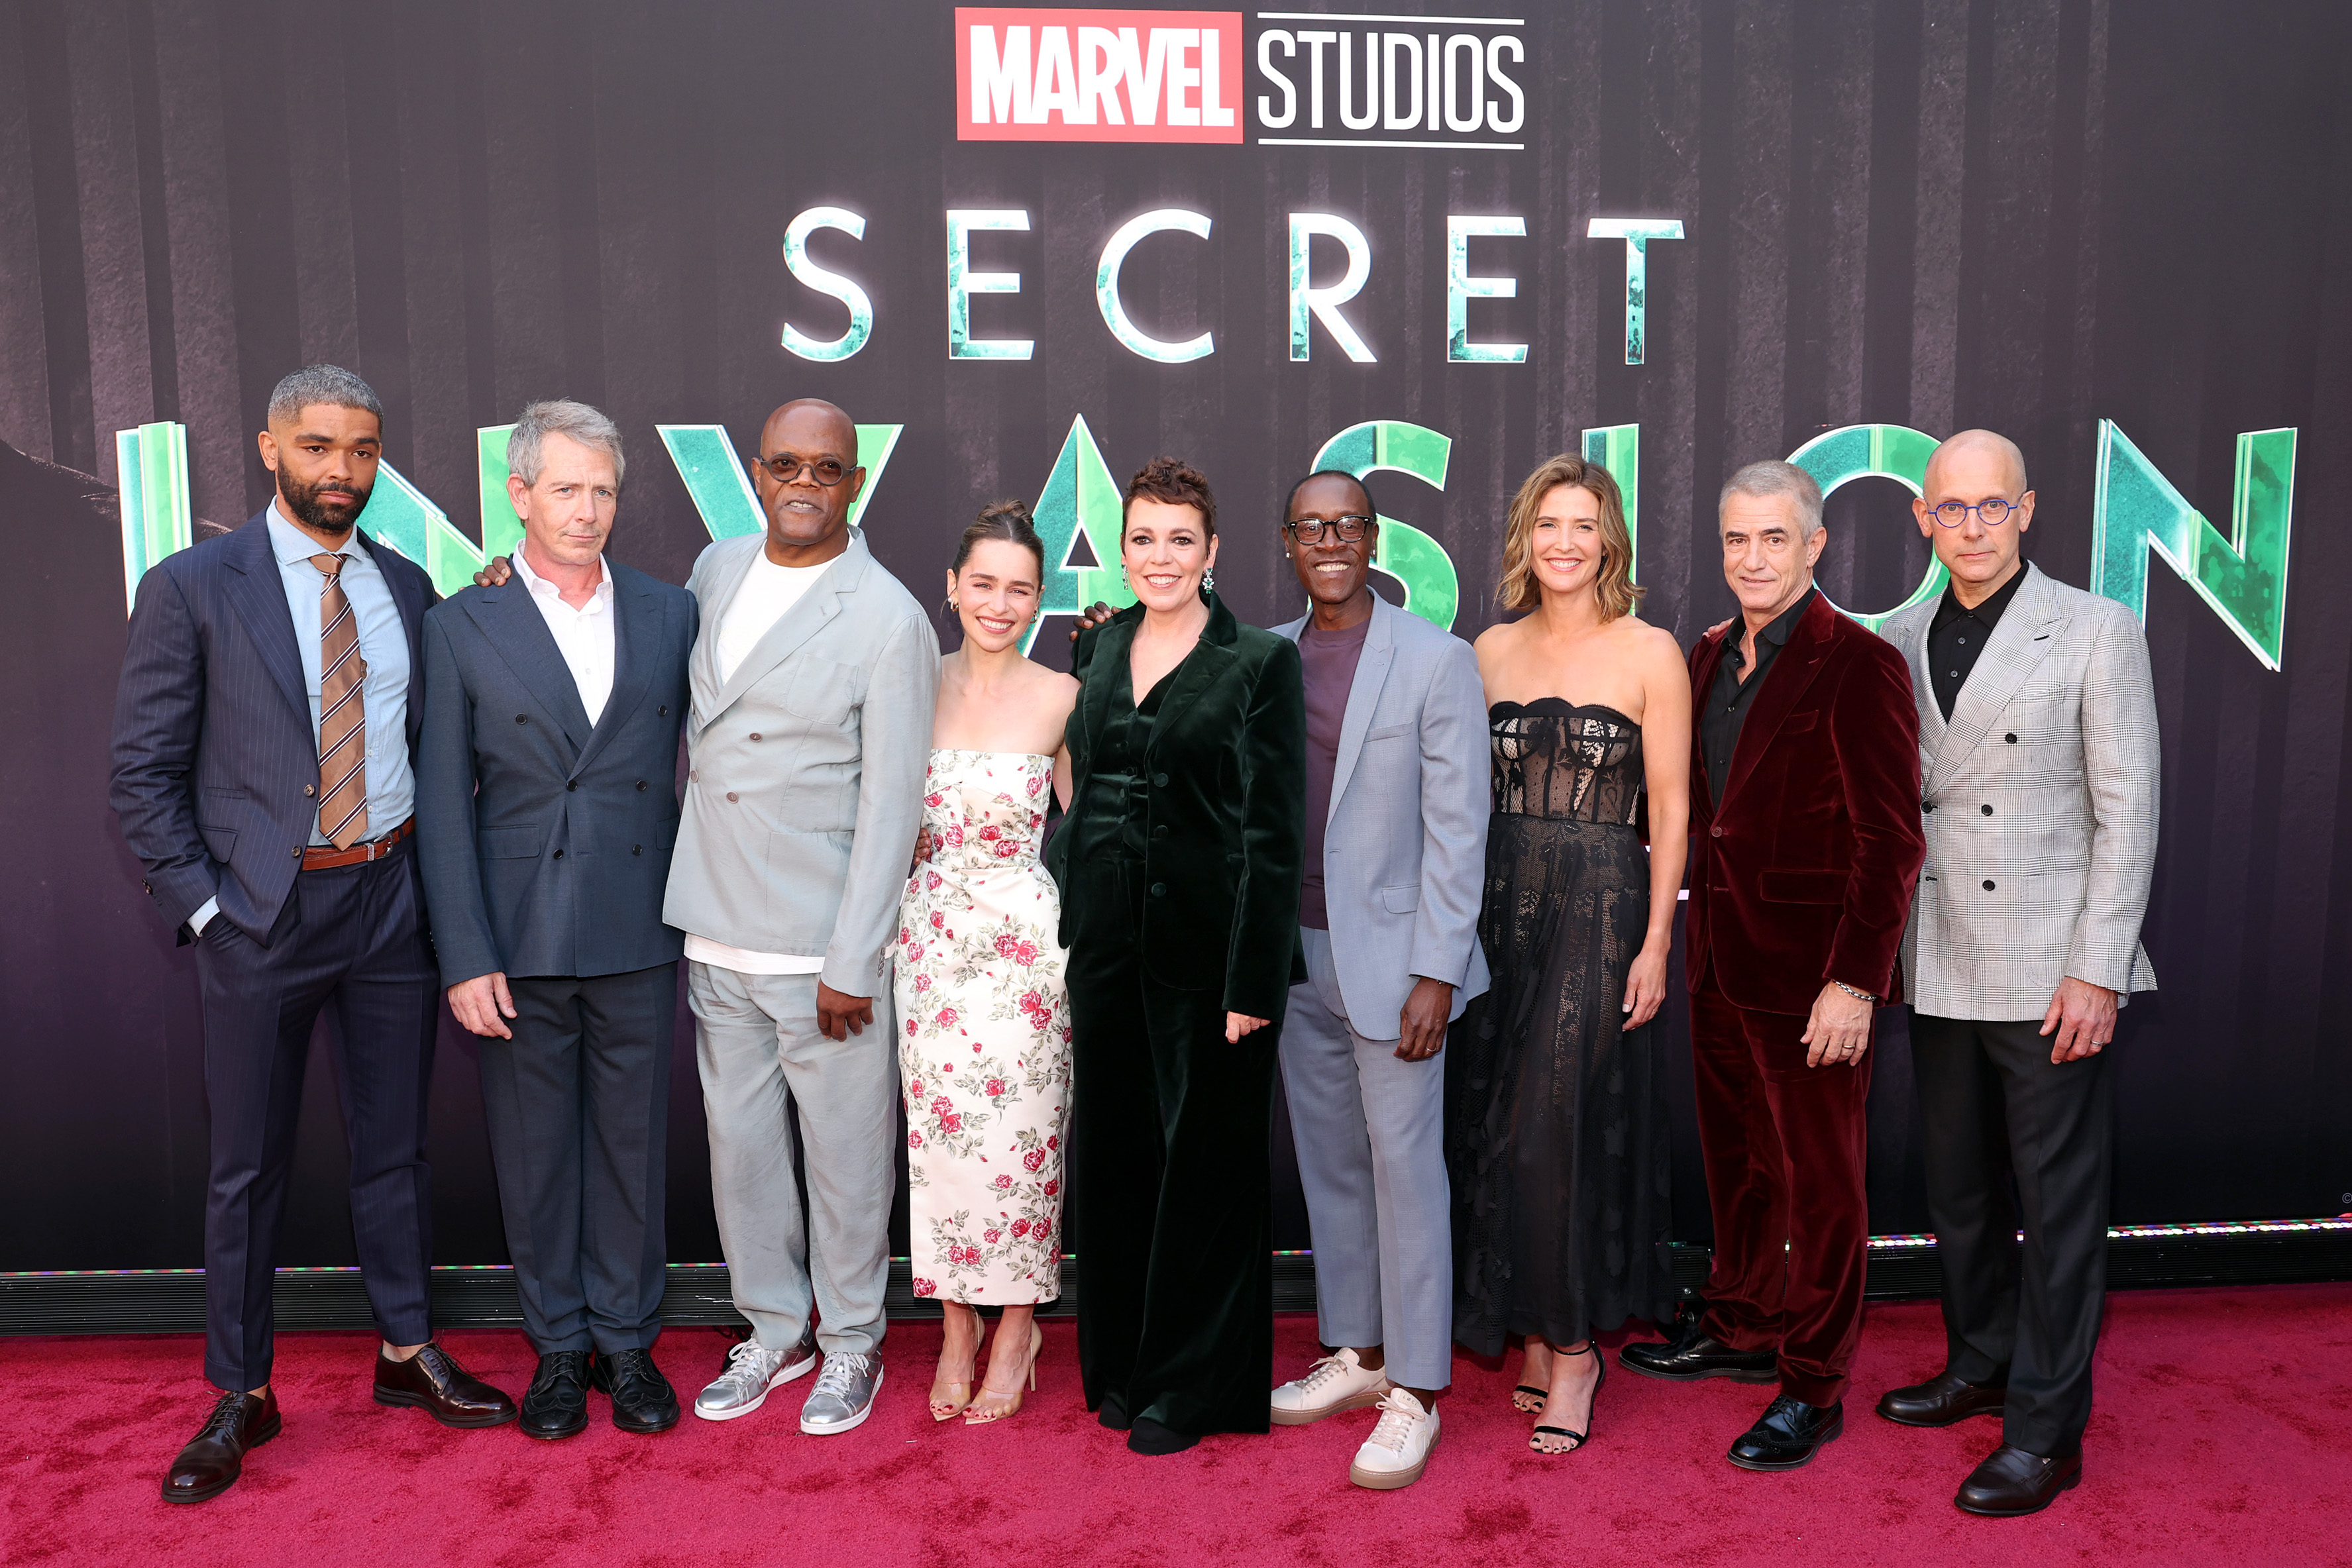 Secret Invasion' benefits from a strong cast